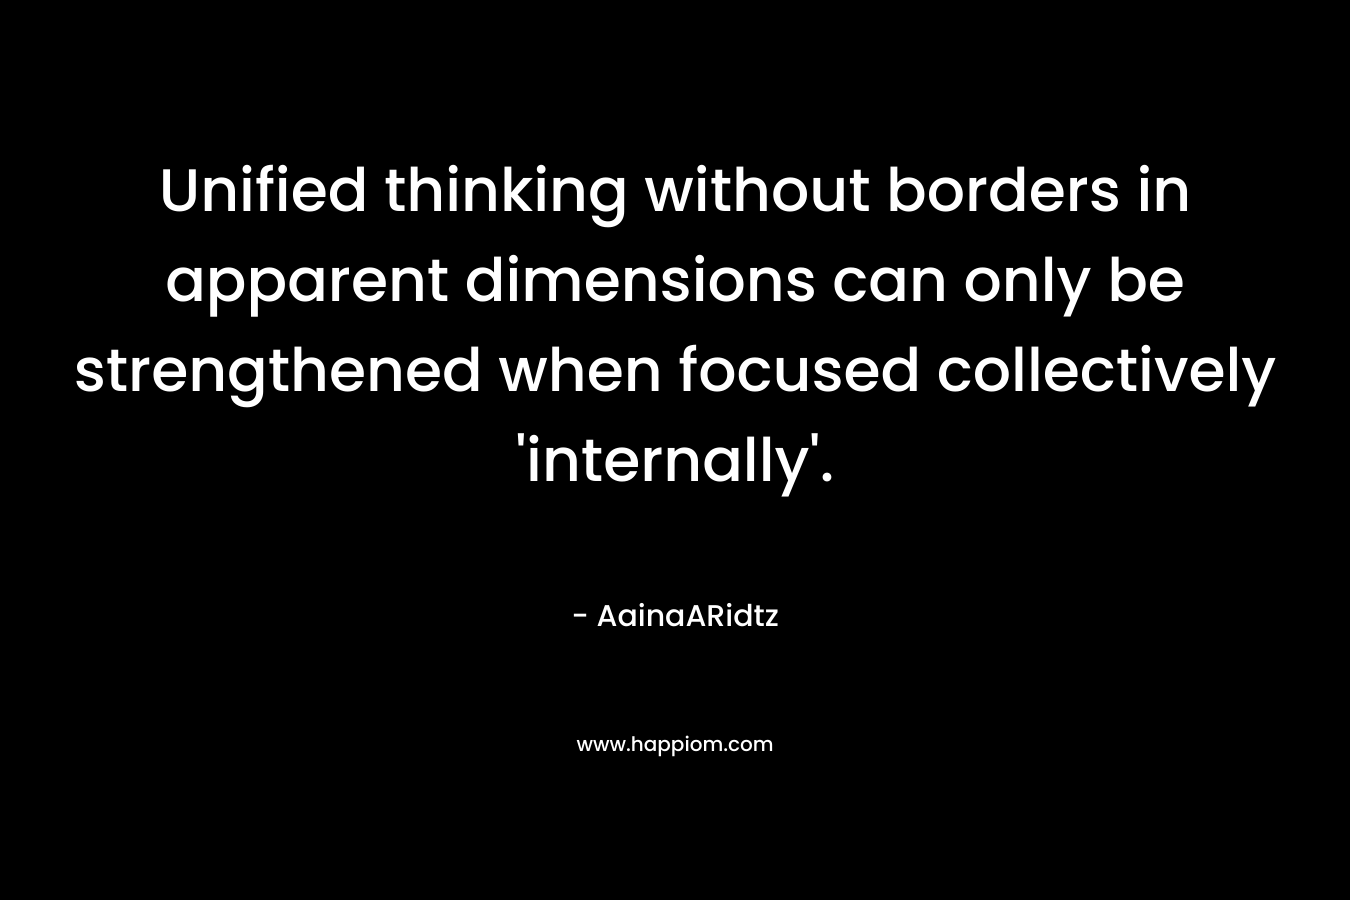 Unified thinking without borders in apparent dimensions can only be strengthened when focused collectively 'internally'.